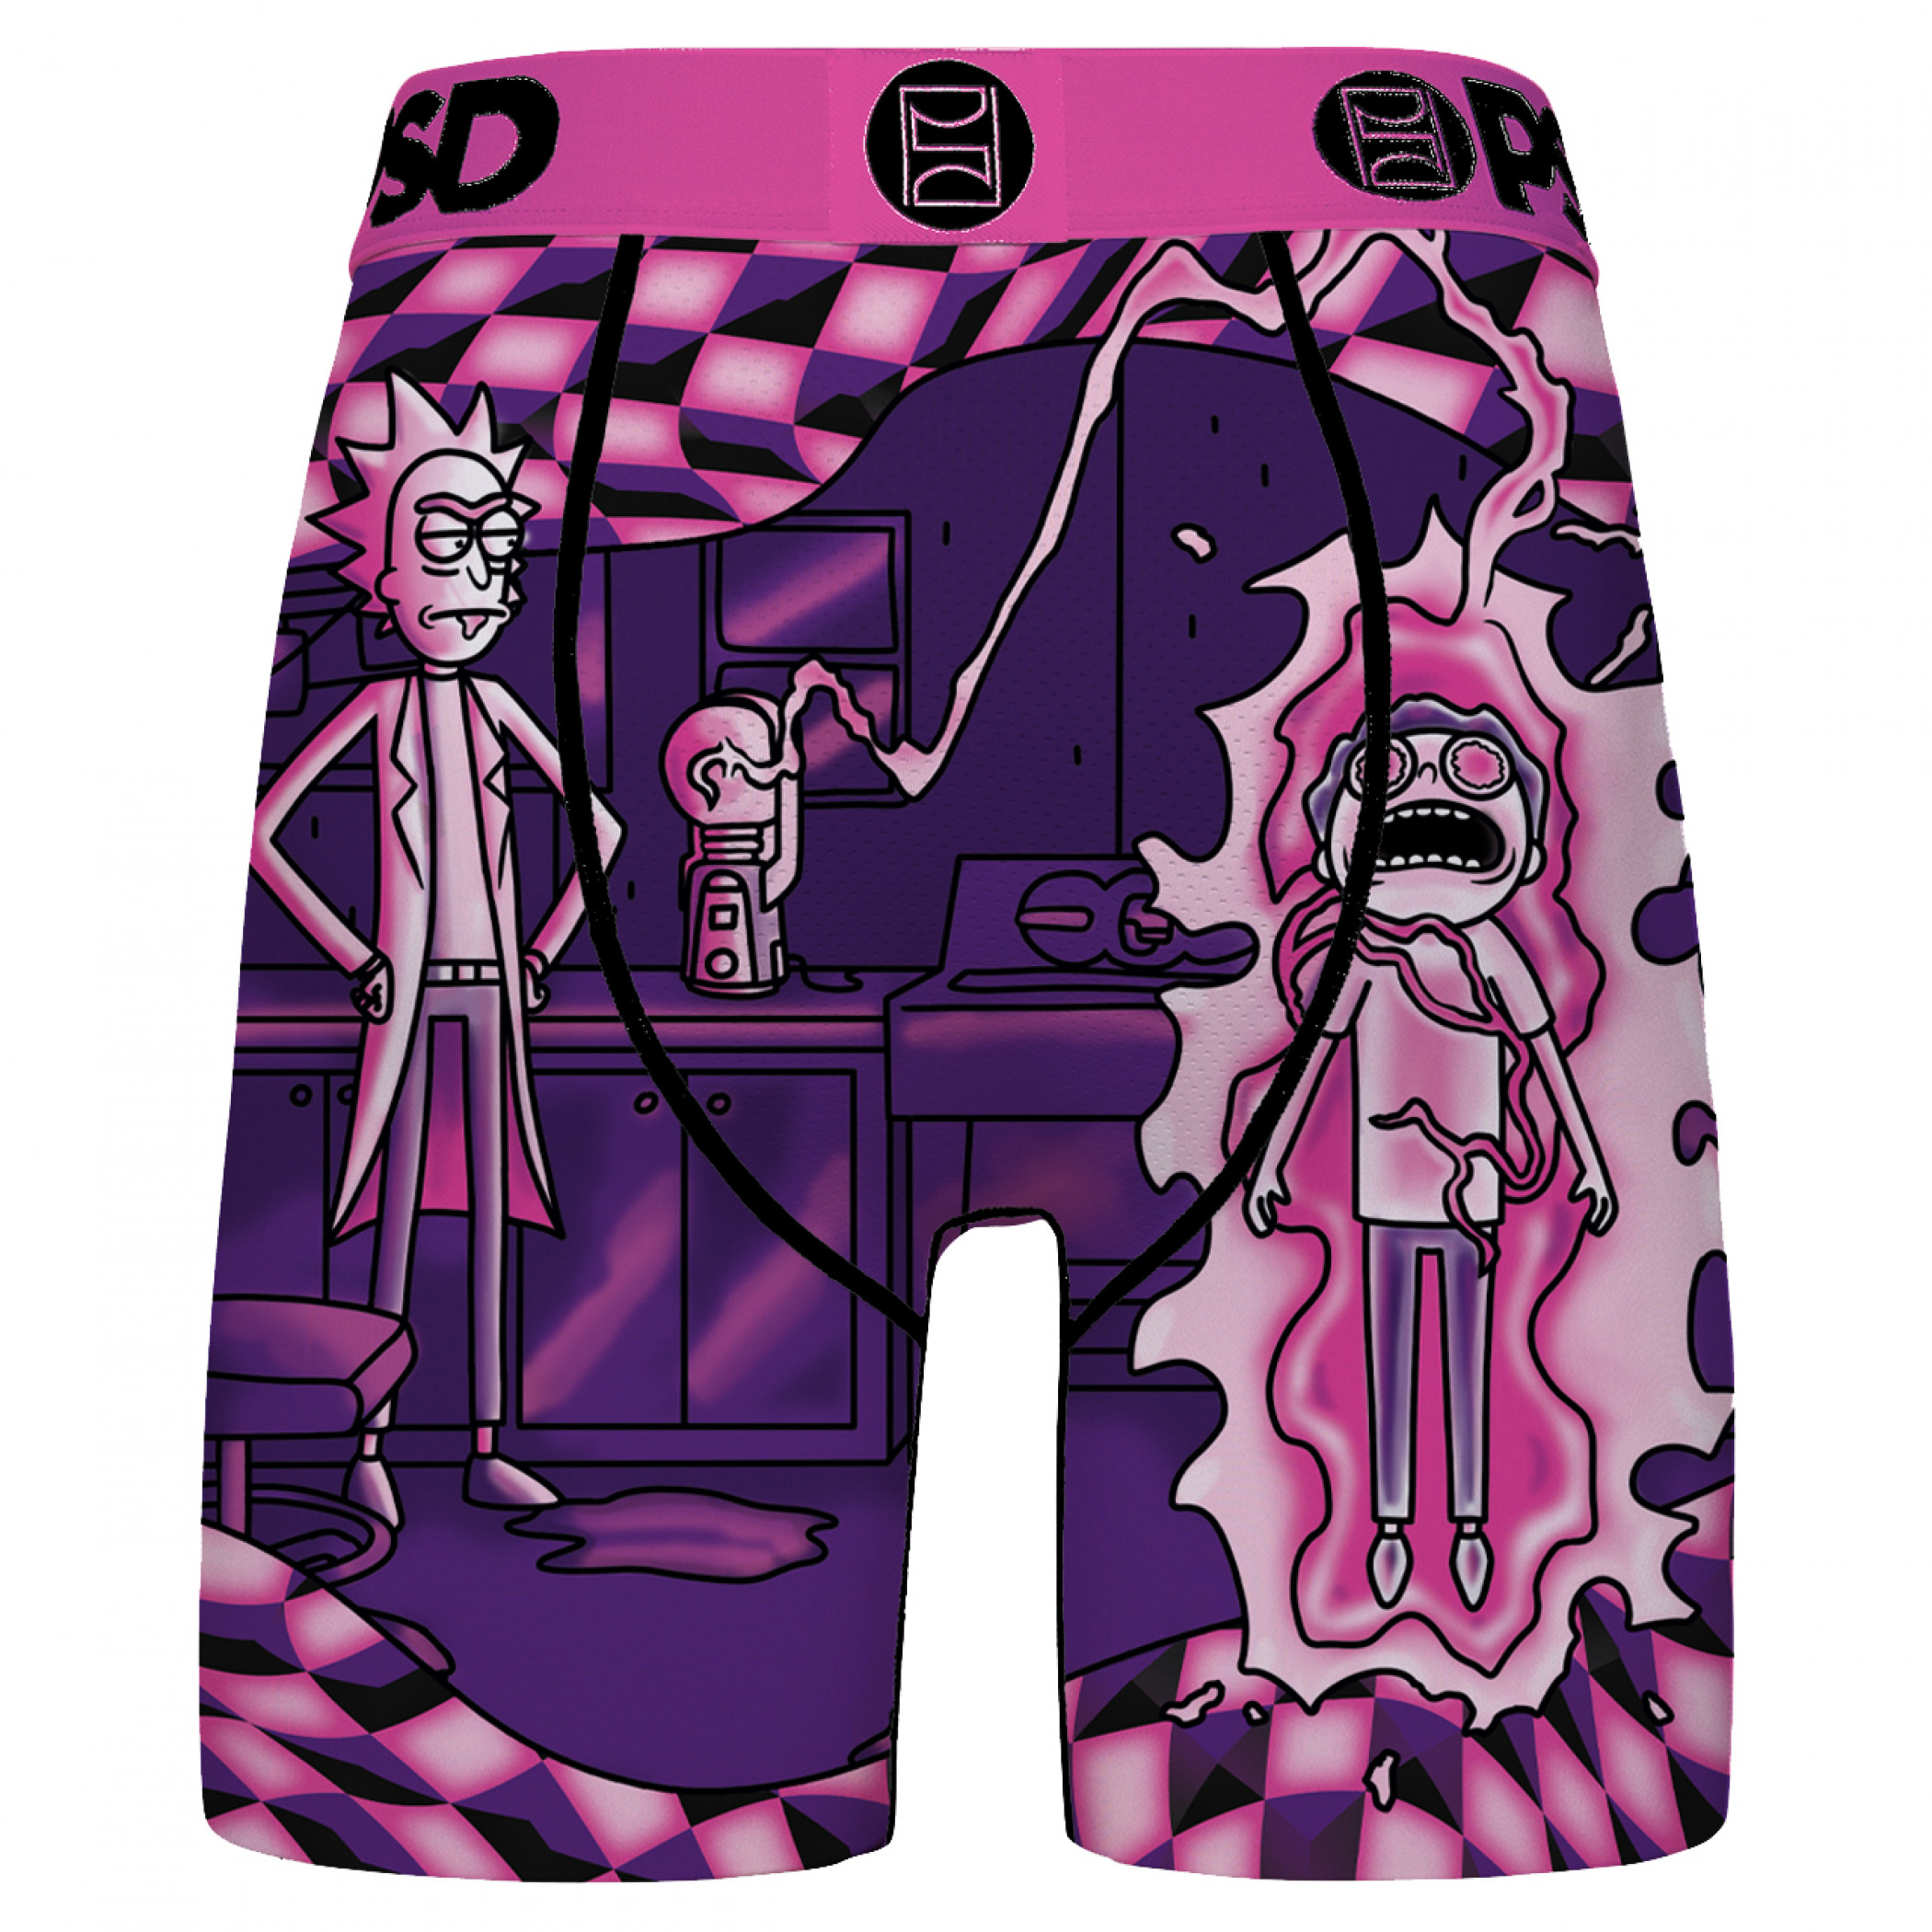 Rick and Morty Lab Work PSD Boxer Briefs